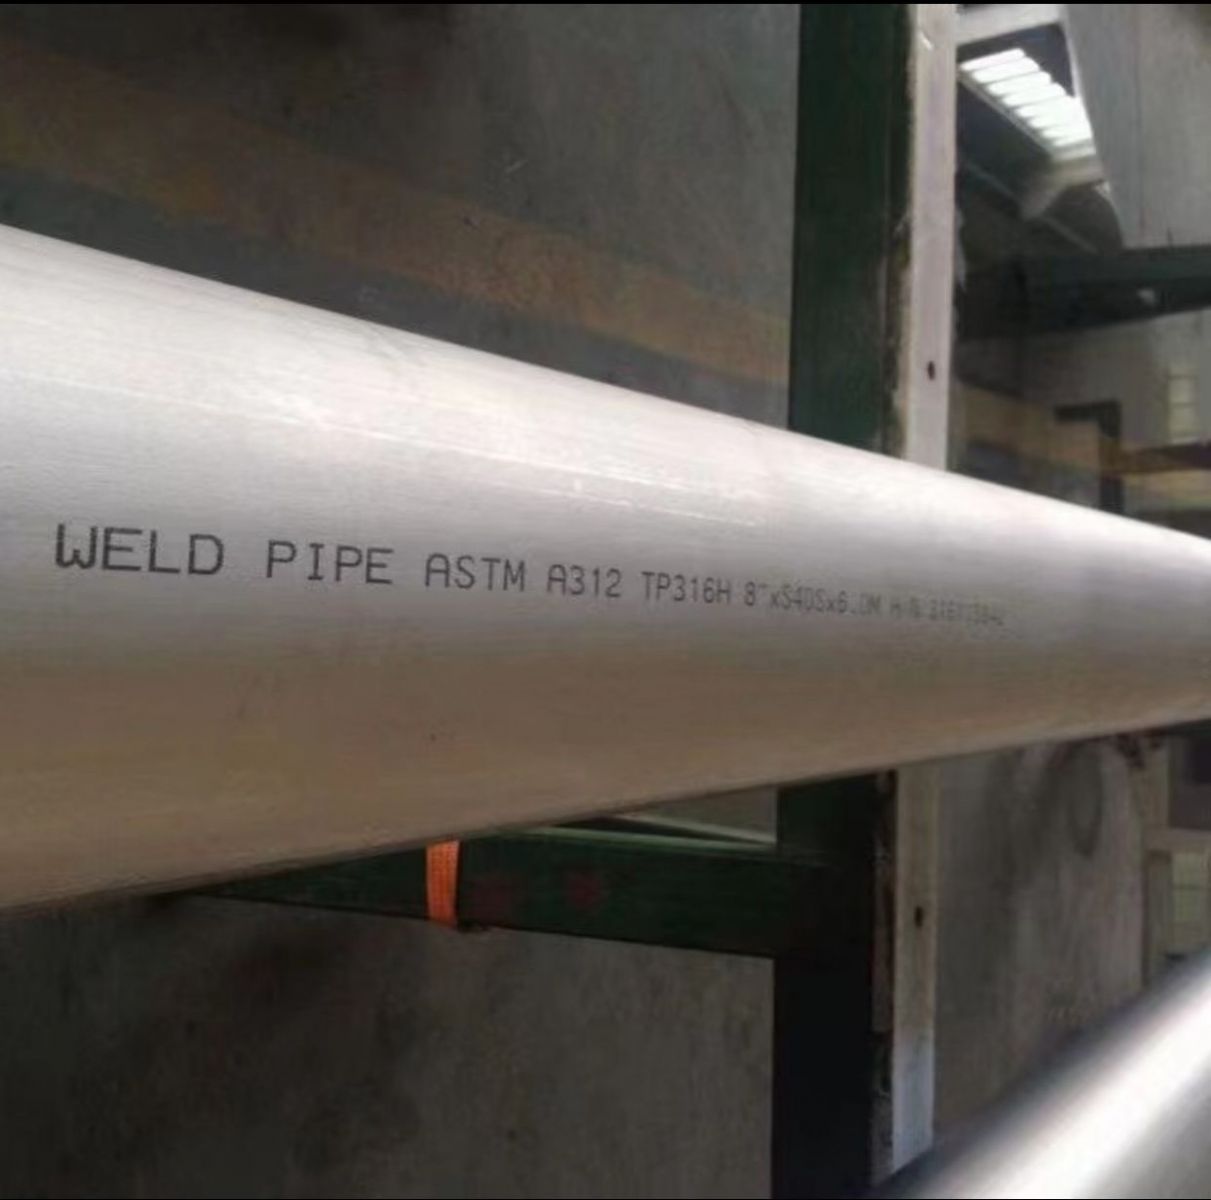 ASTM A312 TP316H Welded Pipe, SCH 40S, 8 Inch, ASME B36.19